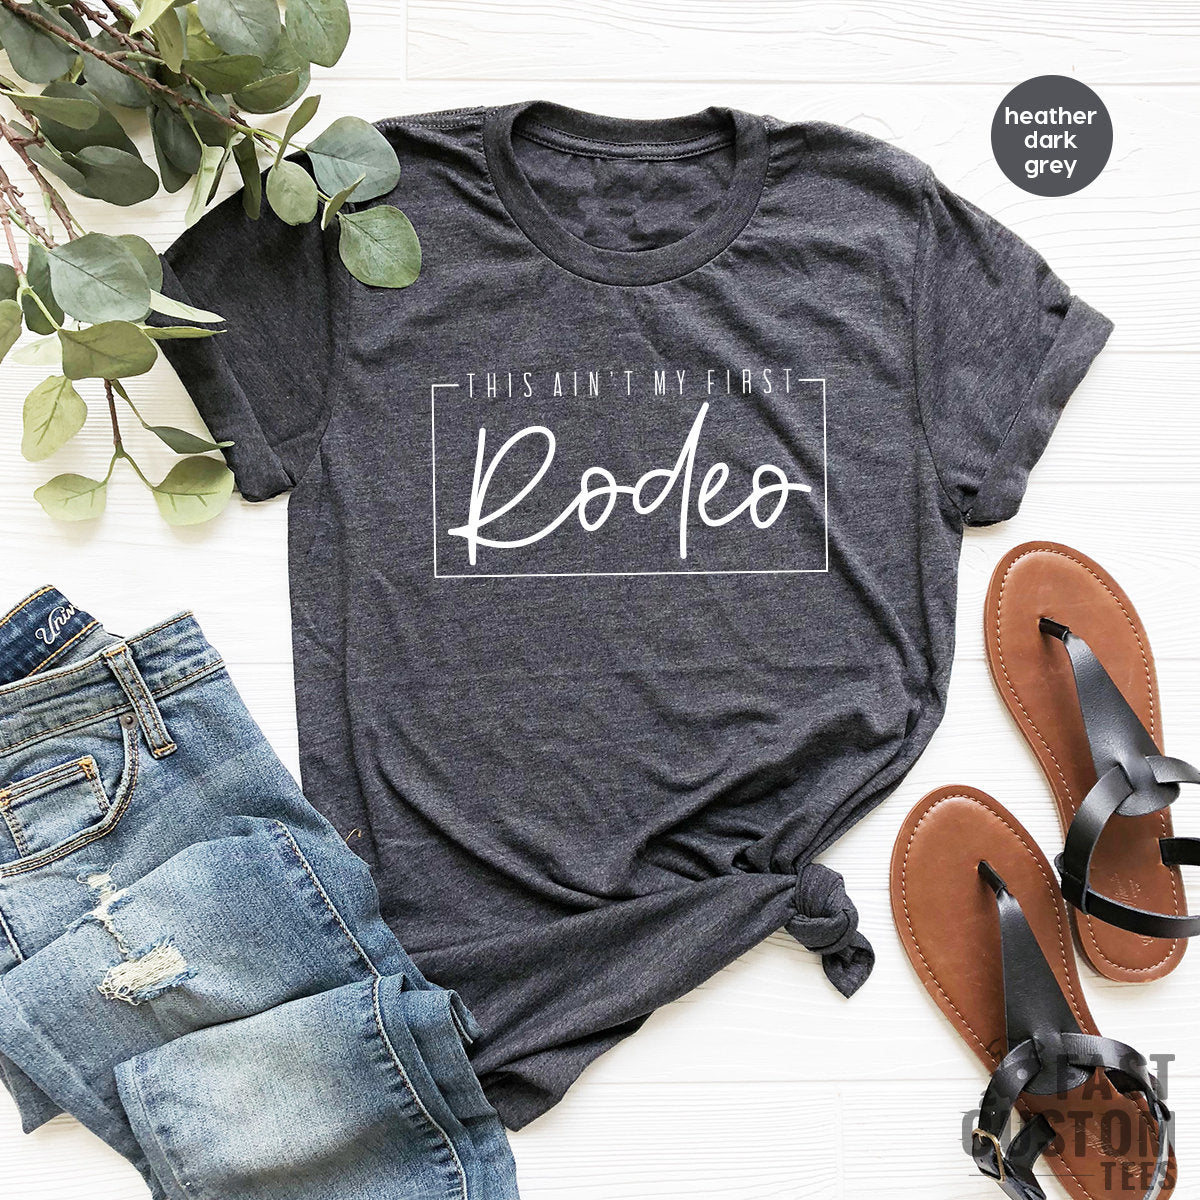 Country Shirt, Rodeo Graphic Tee, This Ain't My First Rodeo Tee, Country TShirt, Southern T Shirt, Western T-Shirt, Cowgirl Shirts - Fastdeliverytees.com